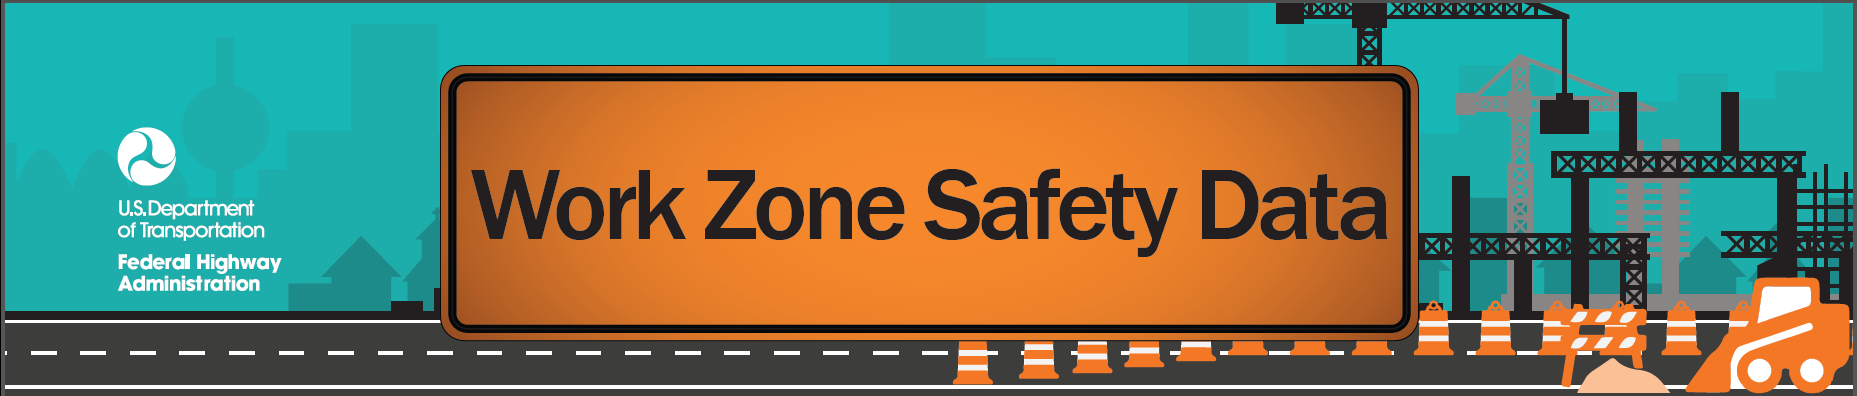 Work Zone Safety Data logo.  U.S. Department of Transportation Federal Highway Administration